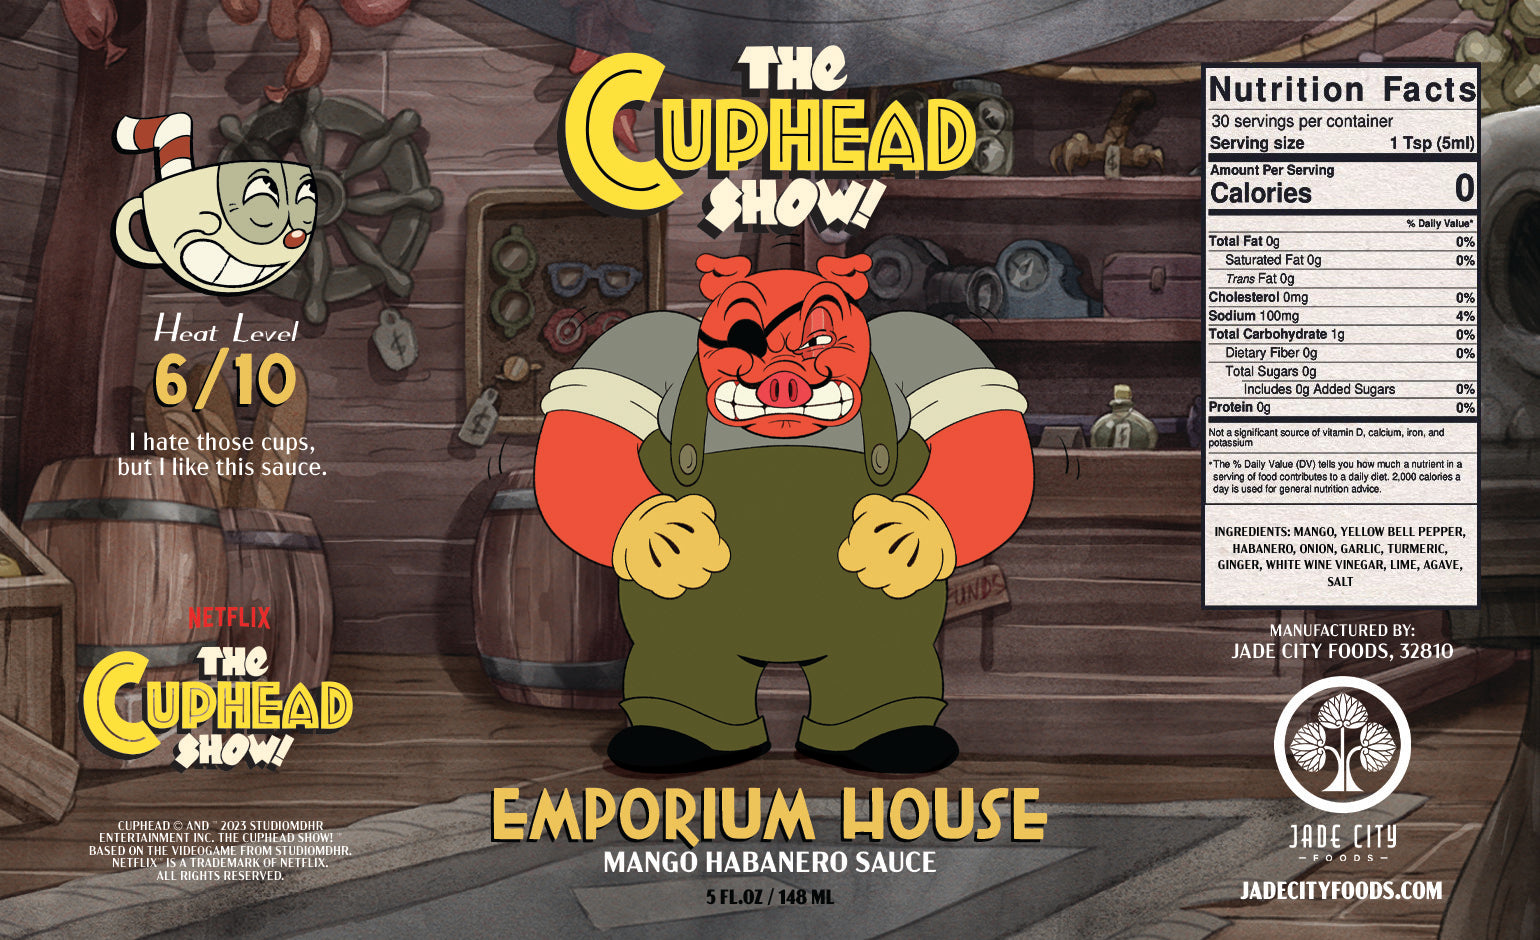 The Cuphead Show! Hot Sauce 5-Pack Series 2